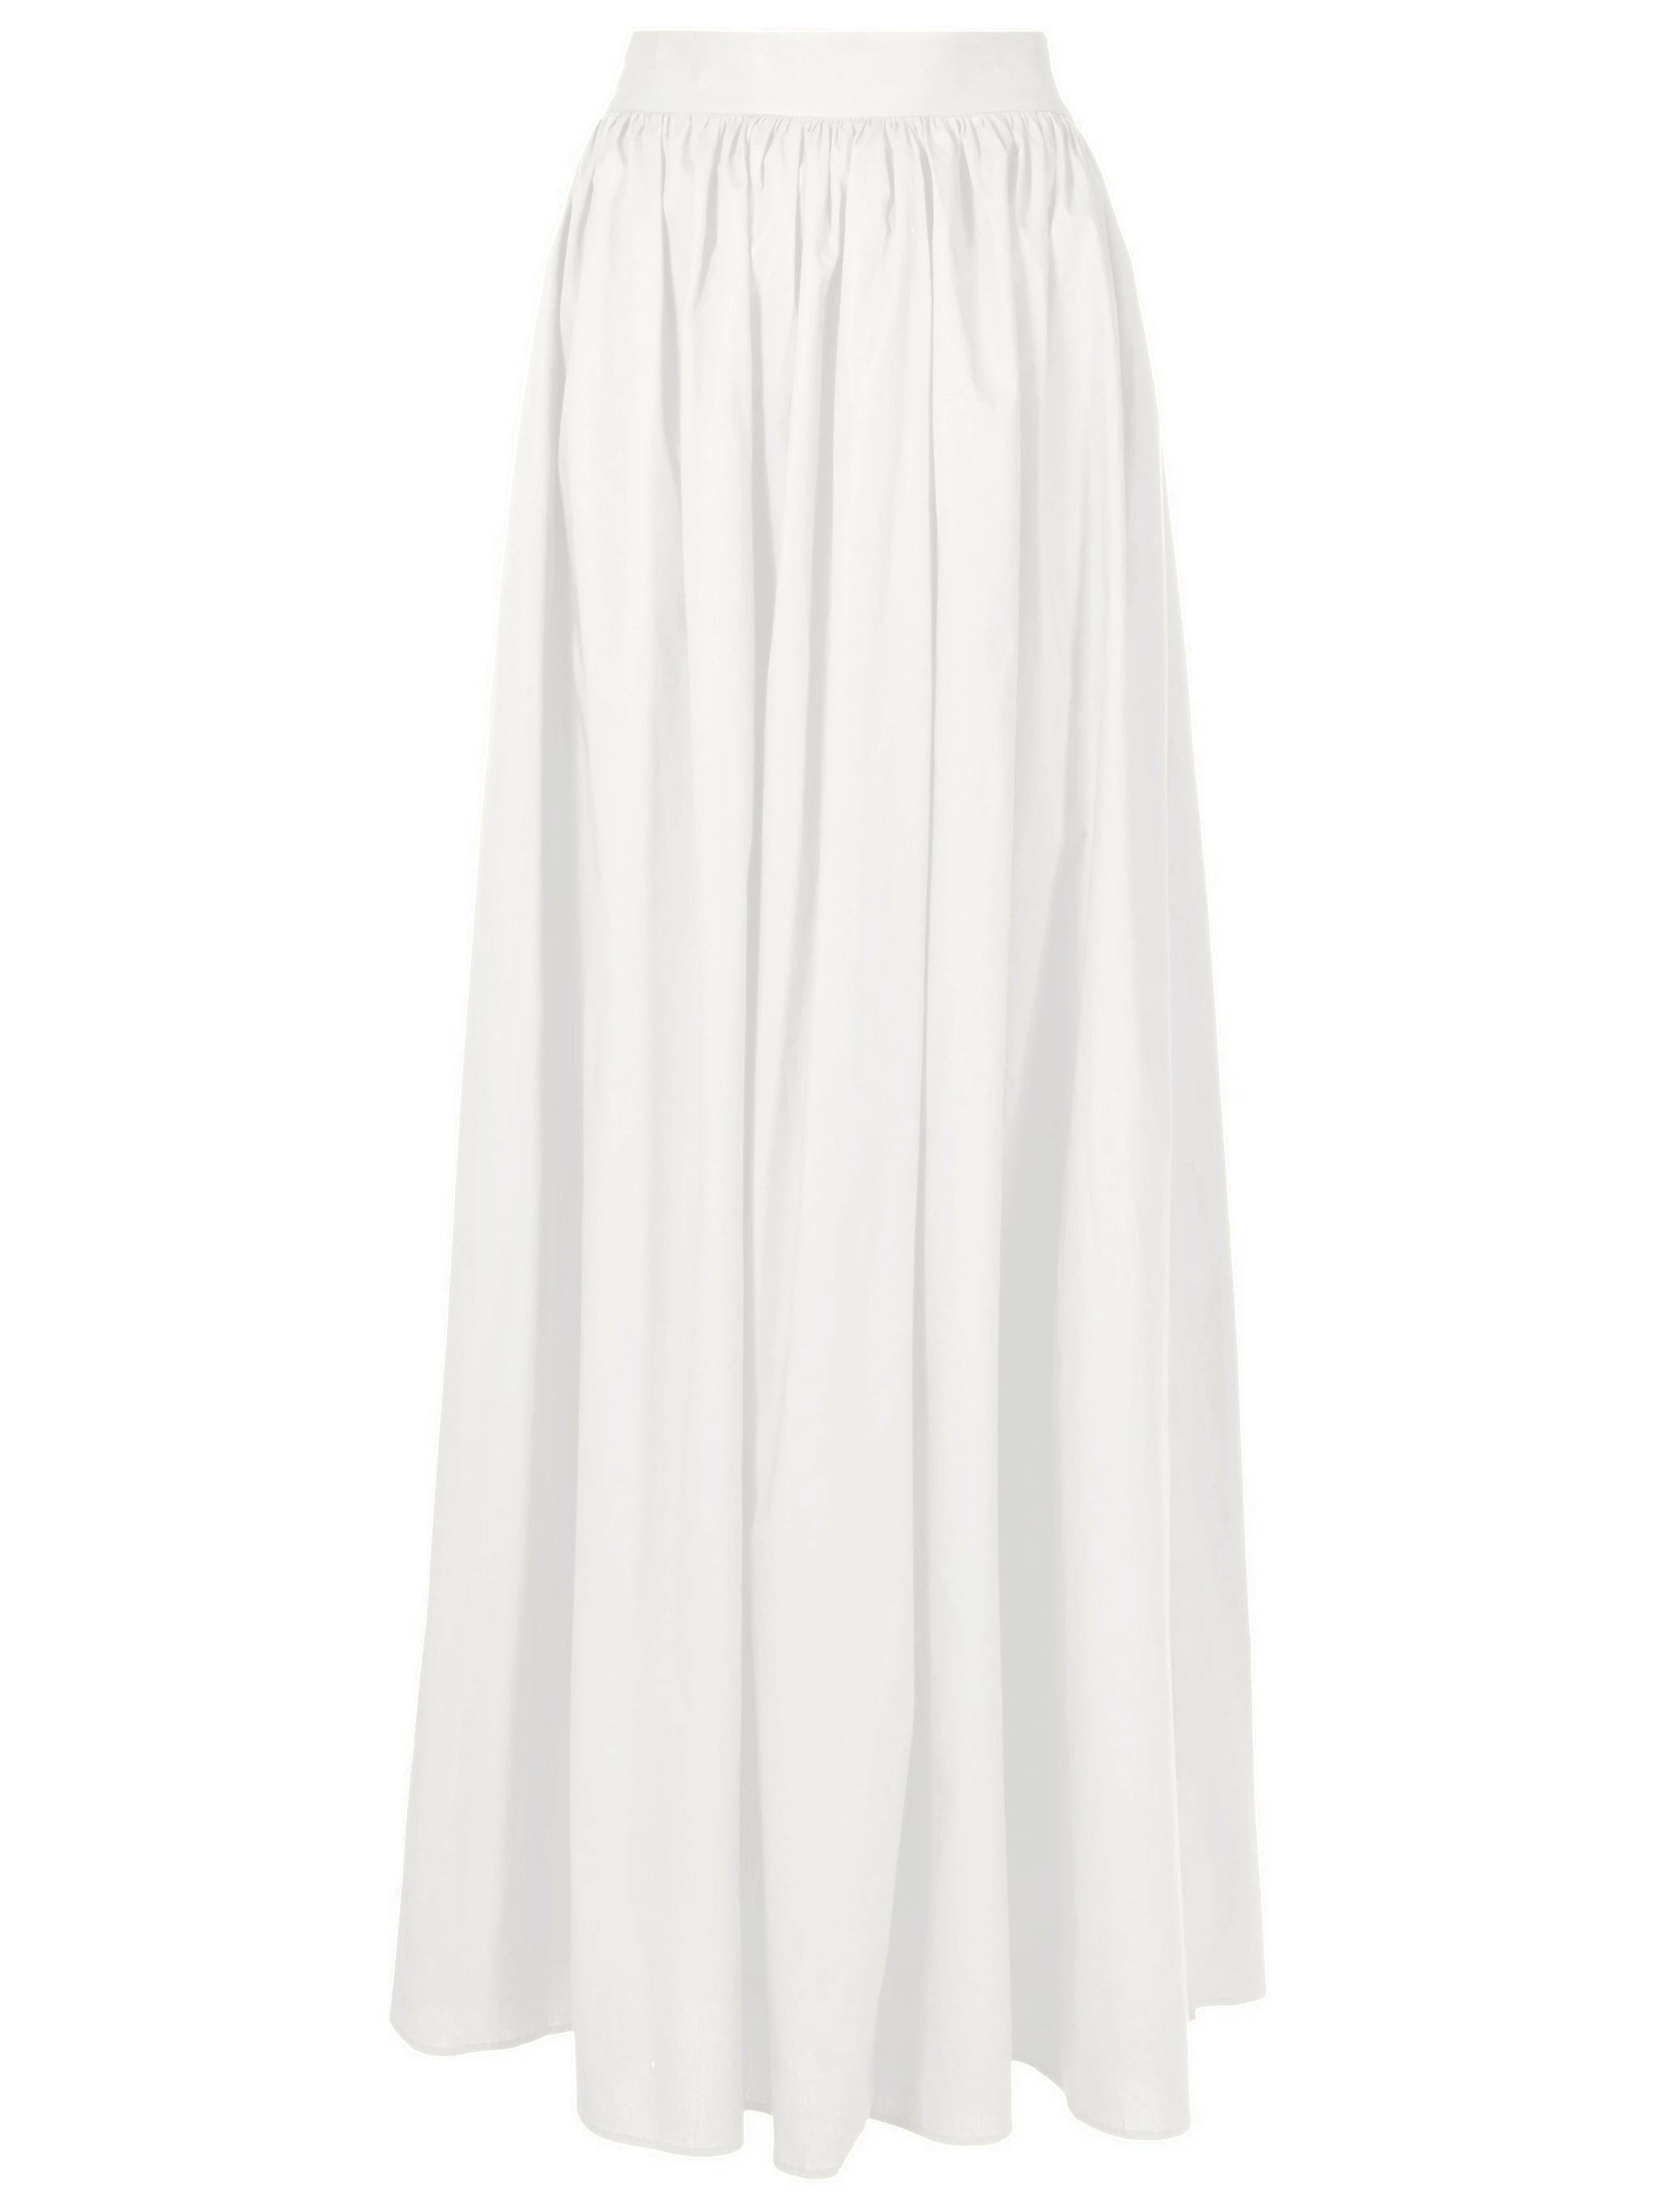 Solid Hearts Off White Long Skirt Product